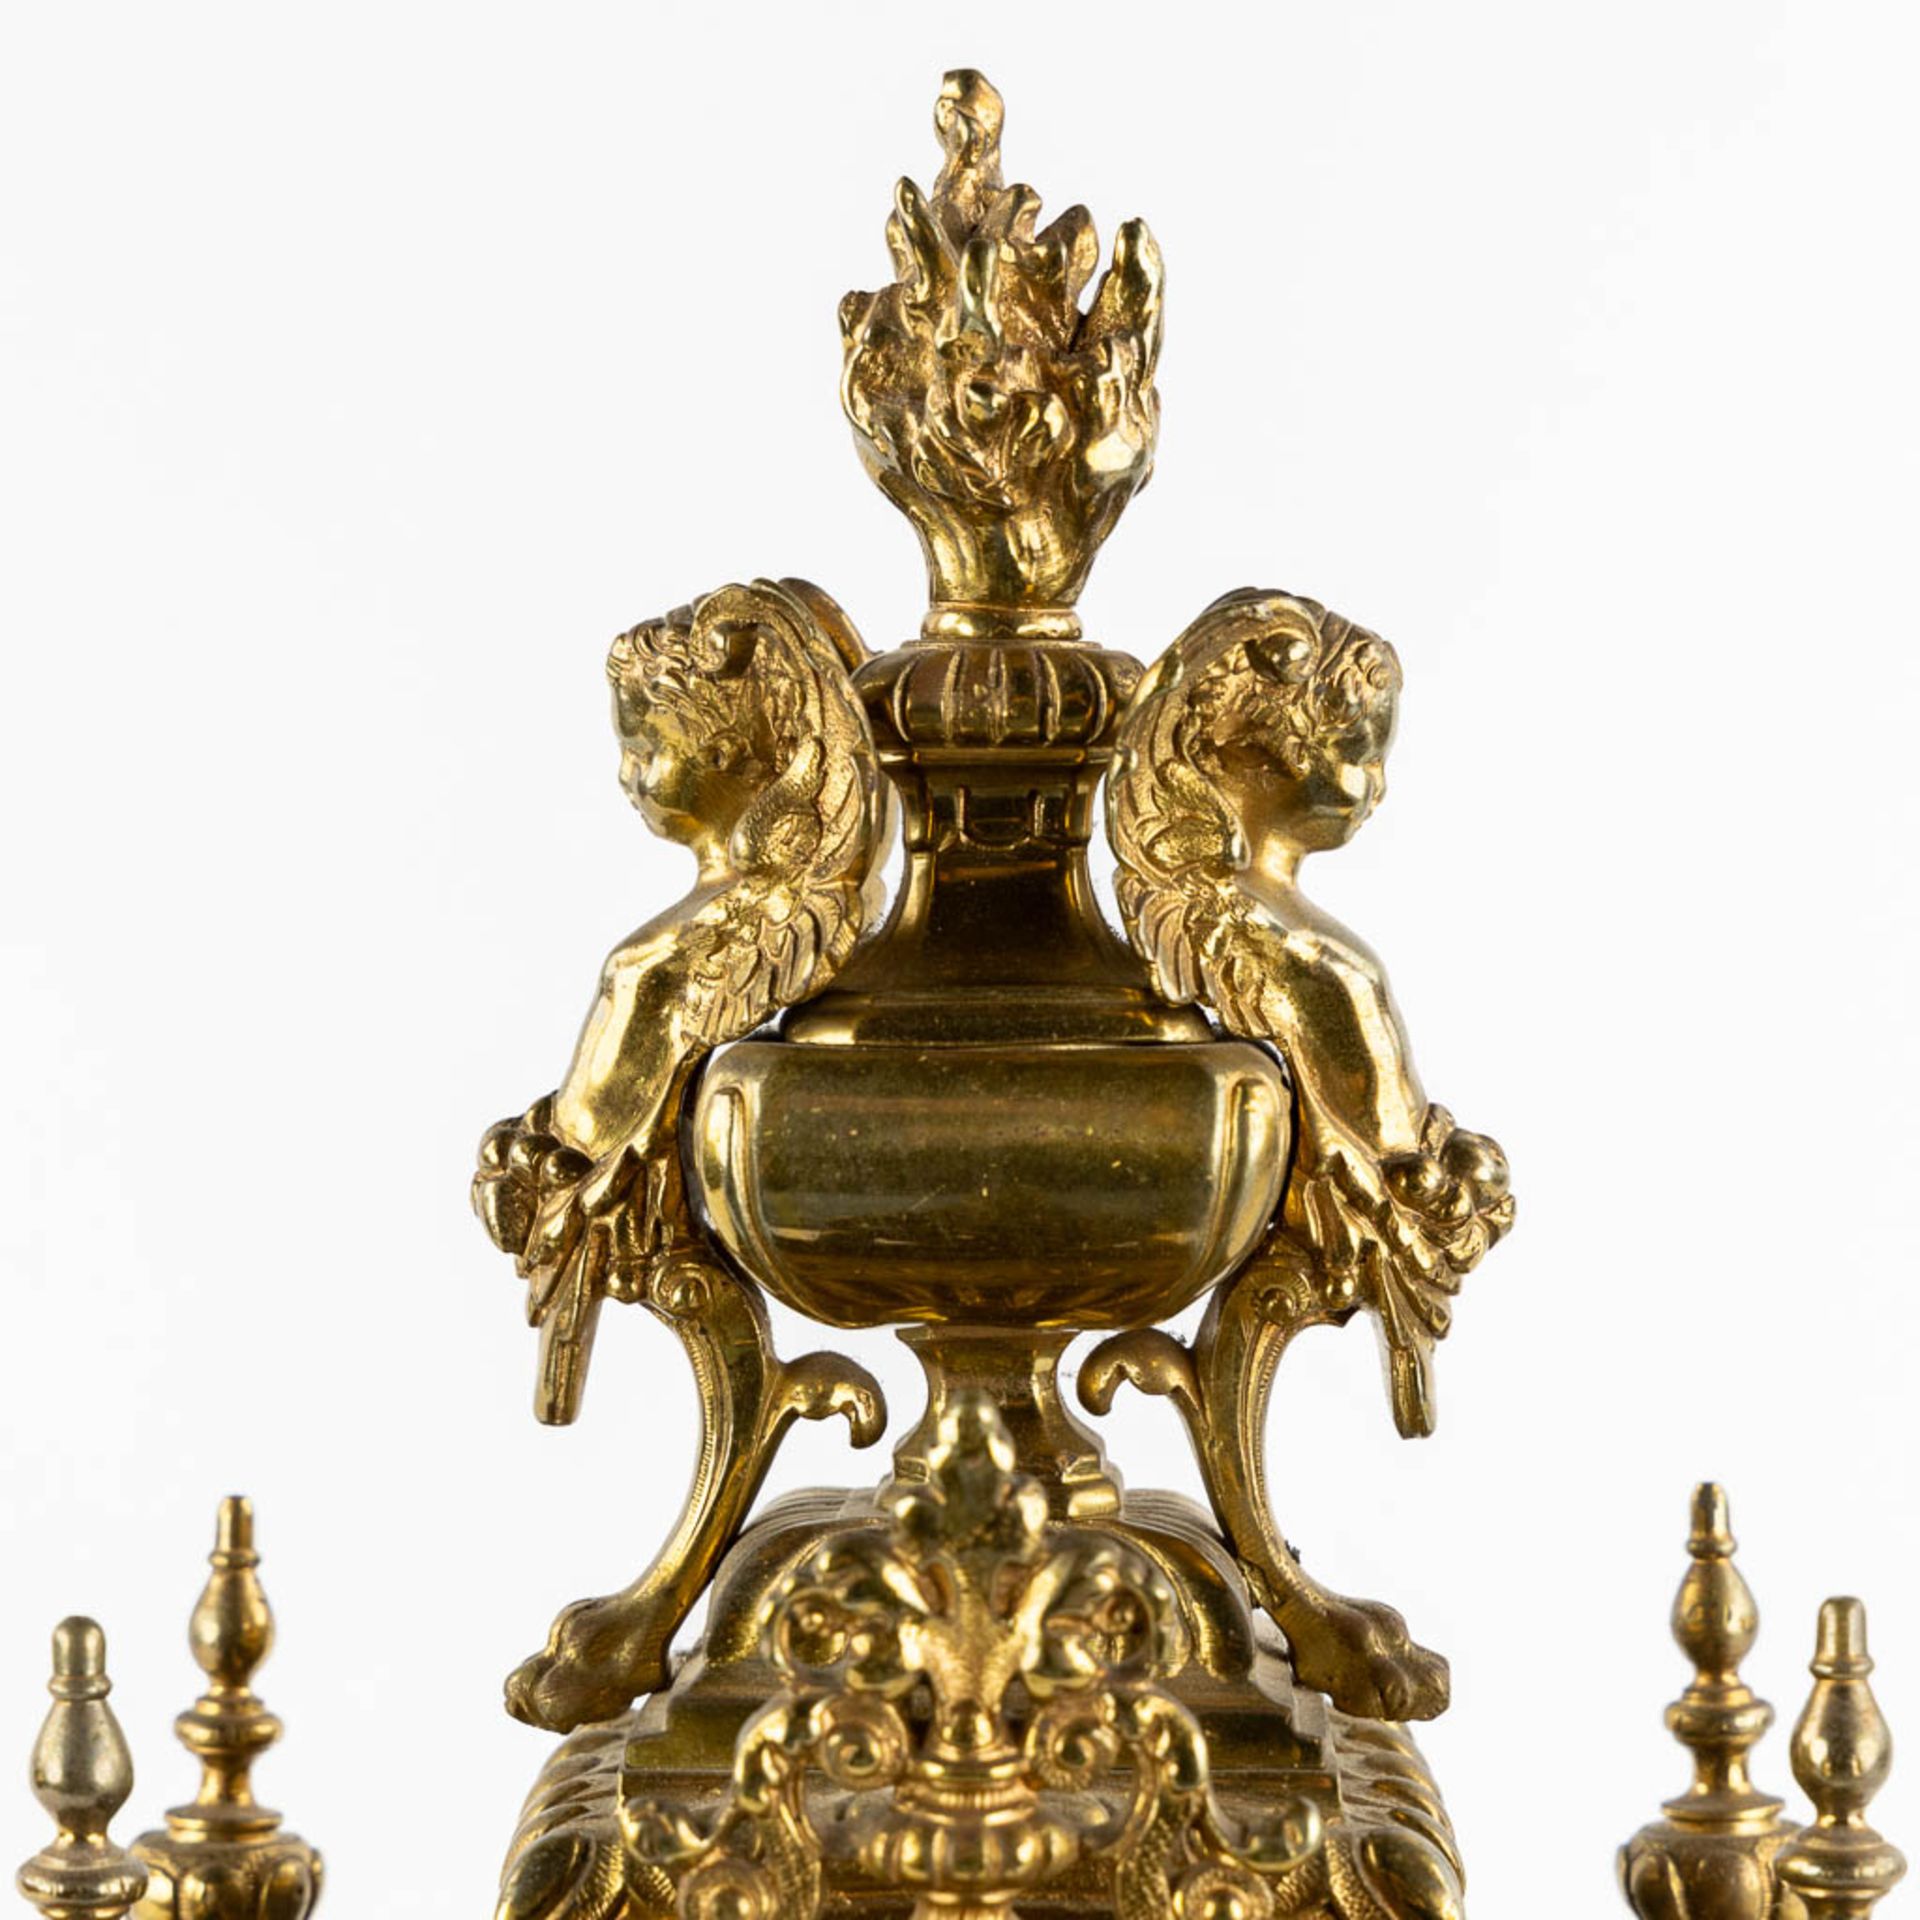 A mantle clock, bronze decorated with angels. Circa 1900. (L:21 x W:27 x H:54 cm) - Image 8 of 13